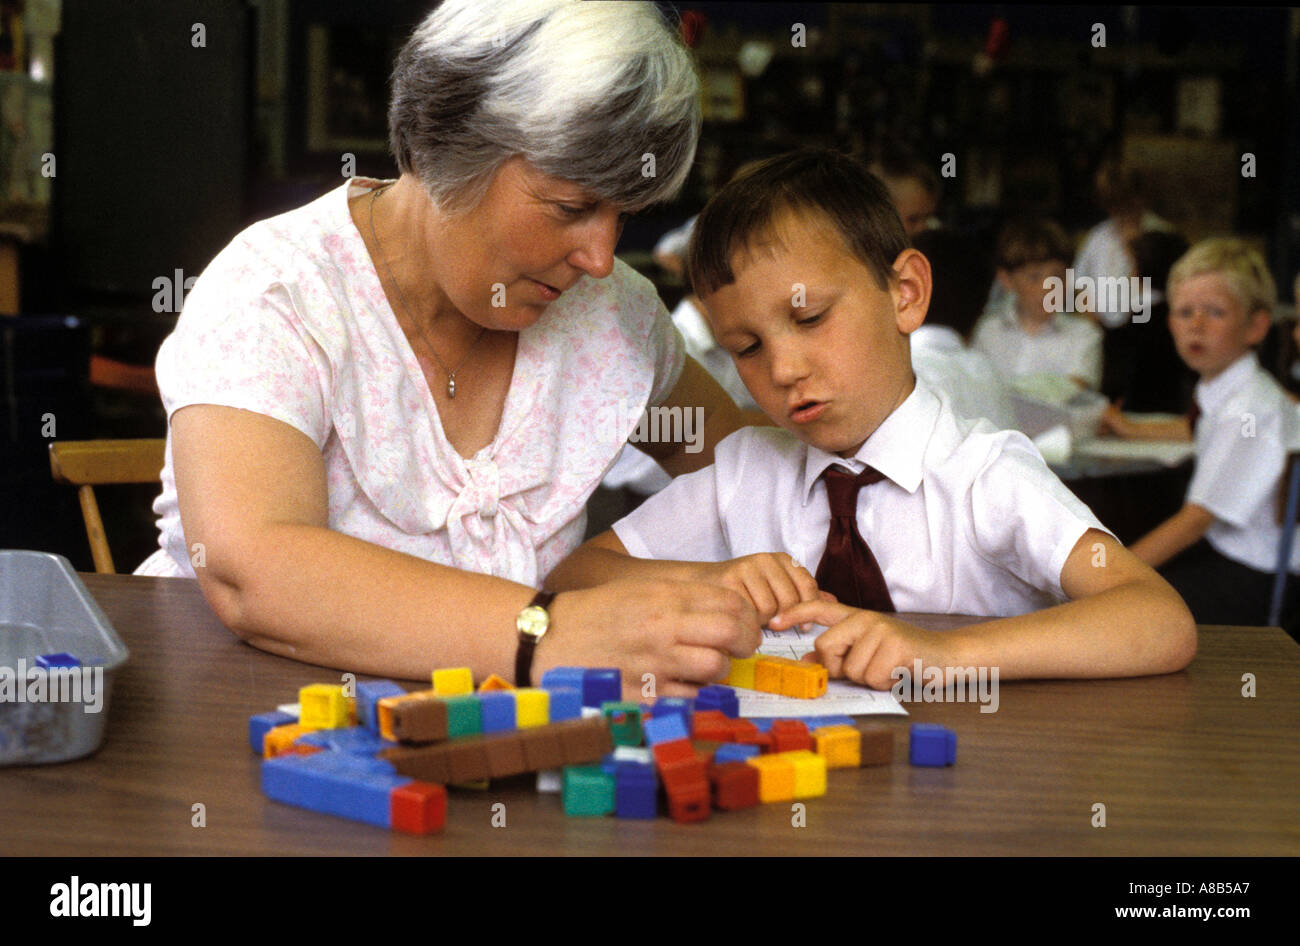 Teacher giving extra help with counting to a dysbraxic child Stock Photo